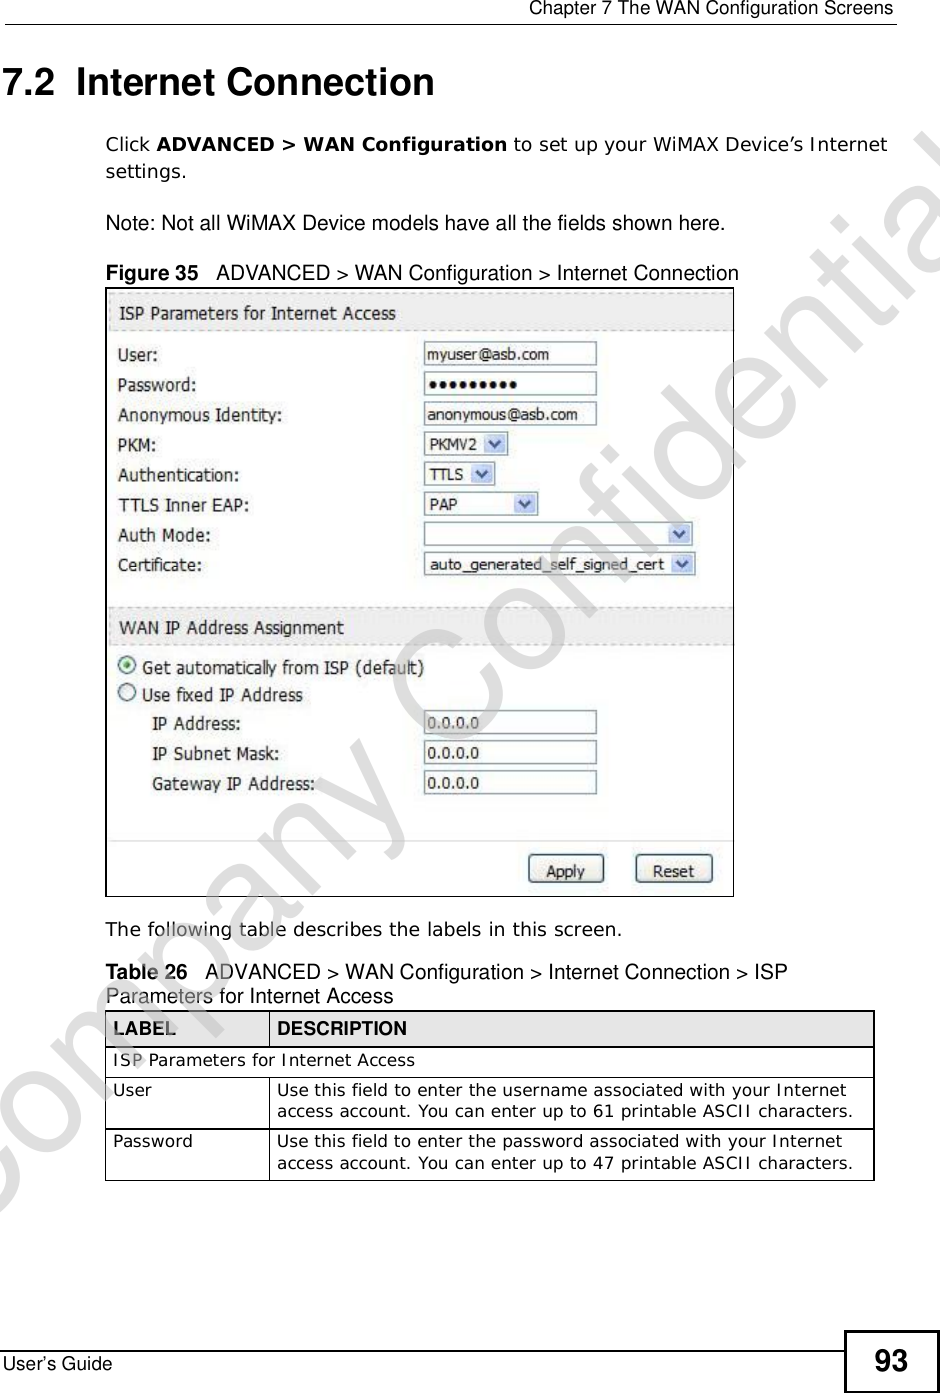  Chapter 7The WAN Configuration ScreensUser’s Guide 937.2  Internet ConnectionClick ADVANCED &gt; WAN Configuration to set up your WiMAX Device’s Internet settings.Note: Not all WiMAX Device models have all the fields shown here.Figure 35   ADVANCED &gt; WAN Configuration &gt; Internet ConnectionThe following table describes the labels in this screen.  Table 26   ADVANCED &gt; WAN Configuration &gt; Internet Connection &gt; ISP Parameters for Internet AccessLABEL DESCRIPTIONISP Parameters for Internet AccessUserUse this field to enter the username associated with your Internet access account. You can enter up to 61 printable ASCII characters.PasswordUse this field to enter the password associated with your Internet access account. You can enter up to 47 printable ASCII characters.Company Confidential